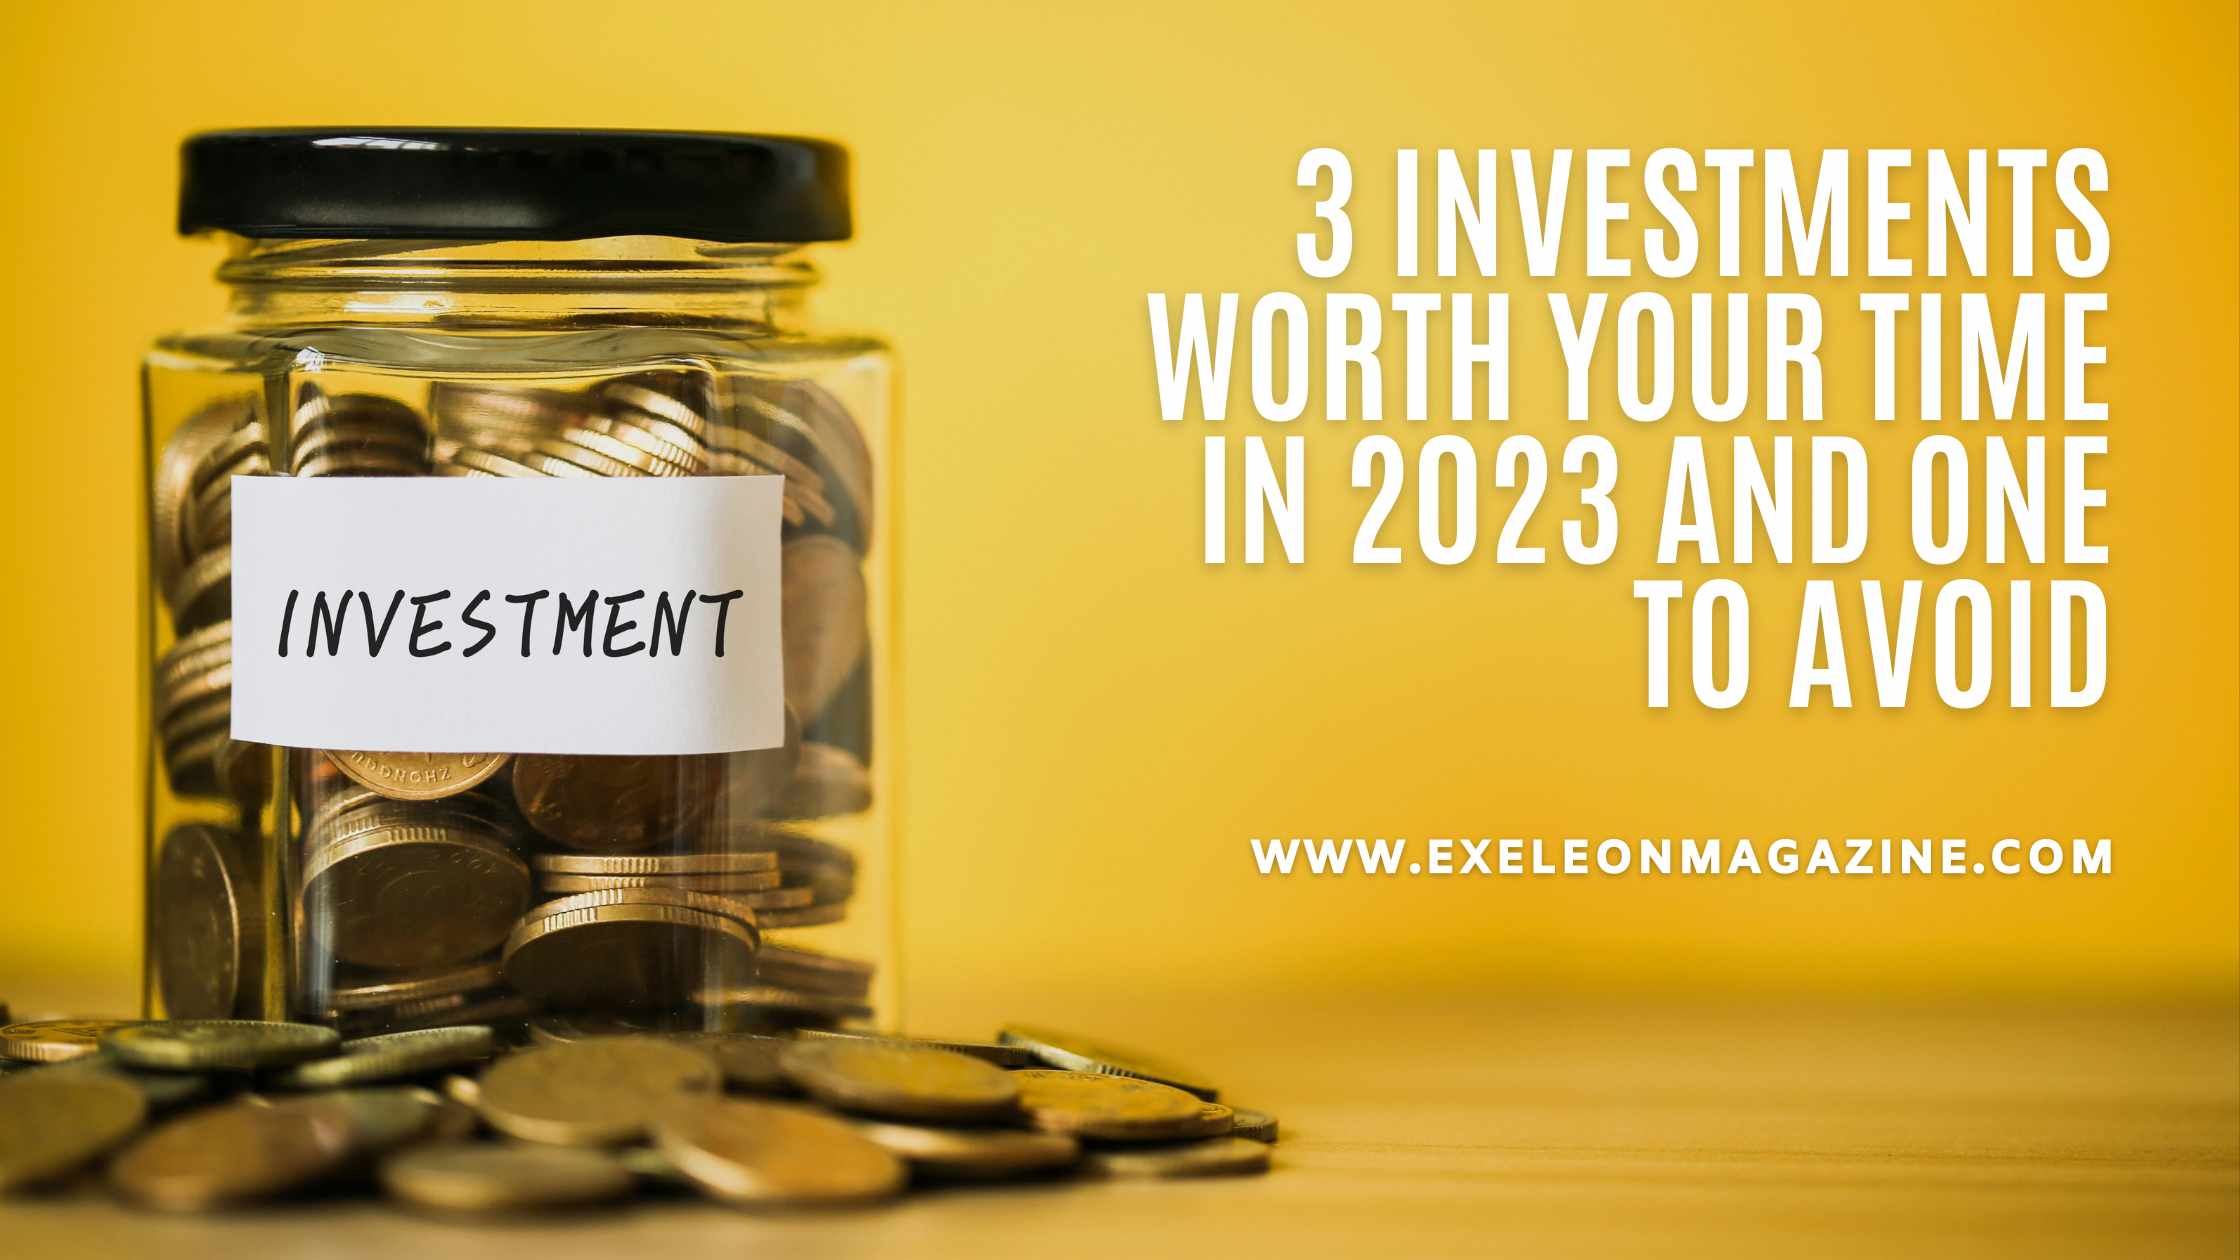 Investments Worth your Time in 2023